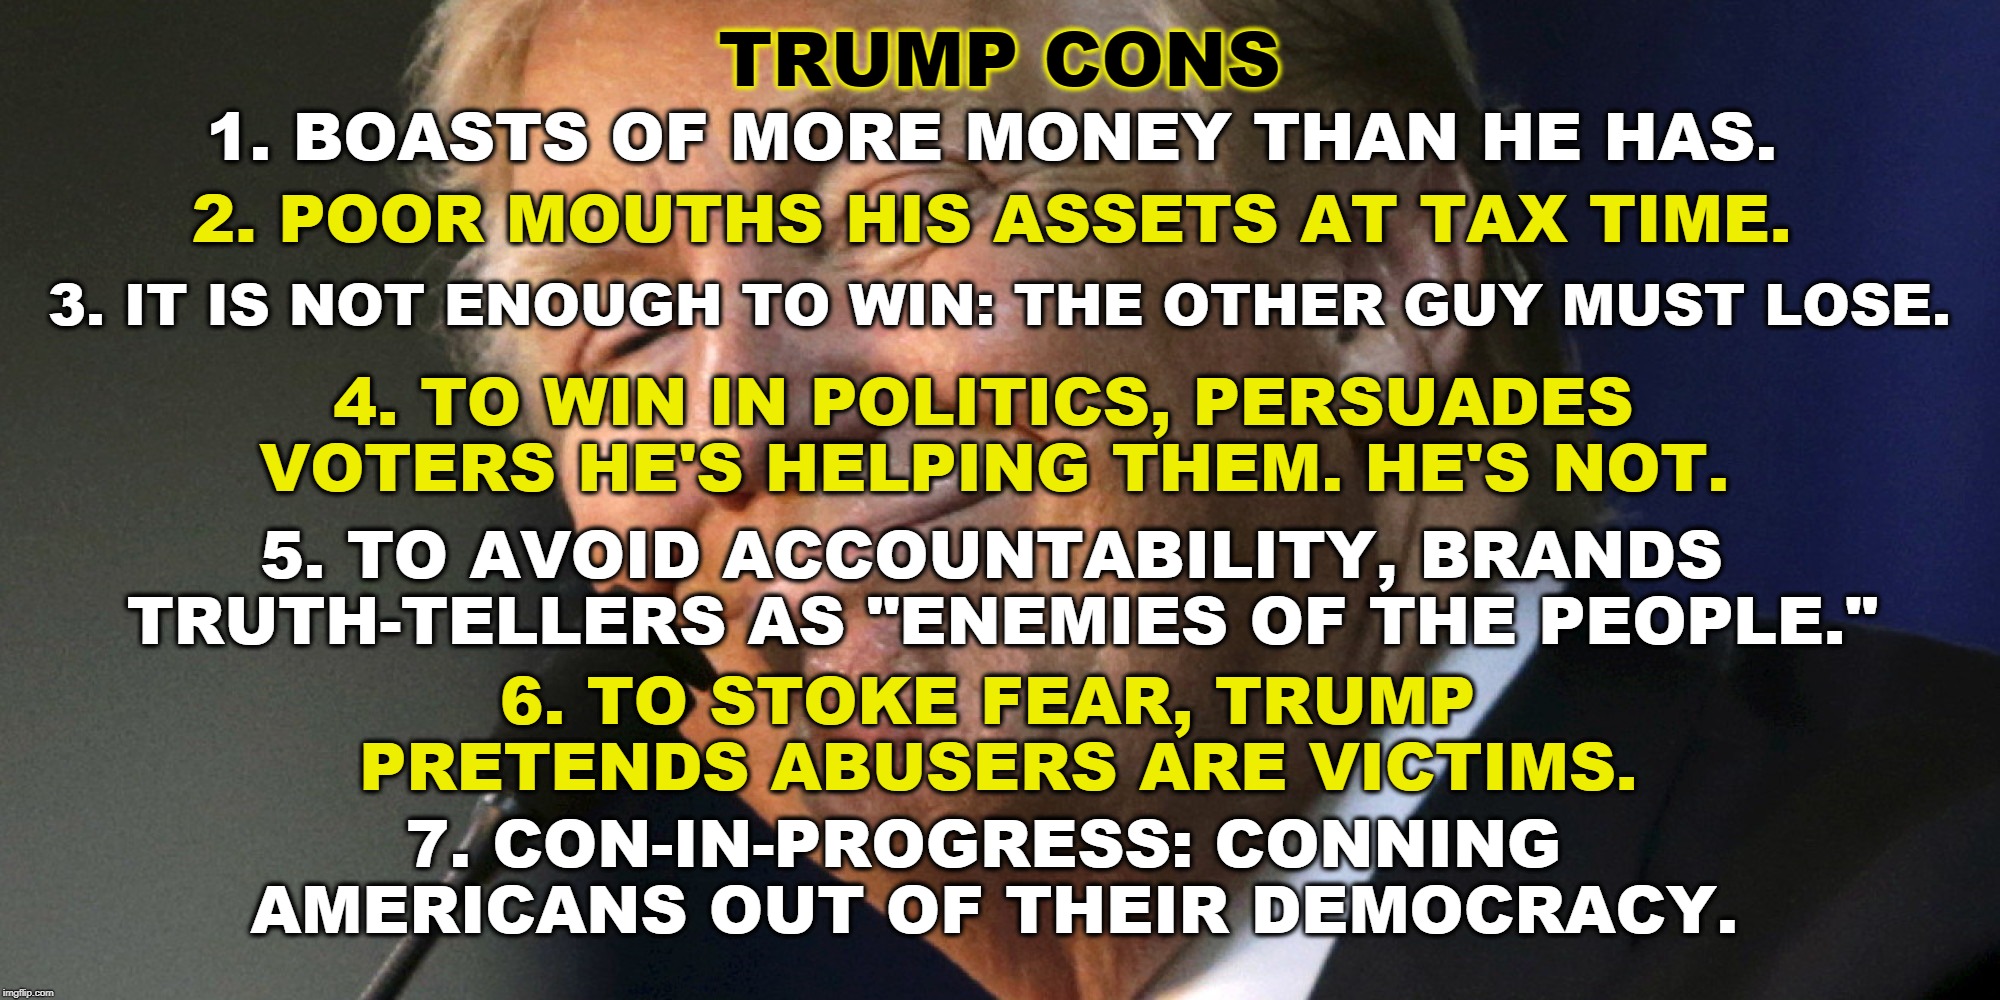 TRUMP CONS; 1. BOASTS OF MORE MONEY THAN HE HAS. 2. POOR MOUTHS HIS ASSETS AT TAX TIME. 3. IT IS NOT ENOUGH TO WIN: THE OTHER GUY MUST LOSE. 4. TO WIN IN POLITICS, PERSUADES VOTERS HE'S HELPING THEM. HE'S NOT. 5. TO AVOID ACCOUNTABILITY, BRANDS TRUTH-TELLERS AS "ENEMIES OF THE PEOPLE."; 6. TO STOKE FEAR, TRUMP PRETENDS ABUSERS ARE VICTIMS. 7. CON-IN-PROGRESS: CONNING AMERICANS OUT OF THEIR DEMOCRACY. | image tagged in trump,conman,lie,falsehood,deception,victim | made w/ Imgflip meme maker